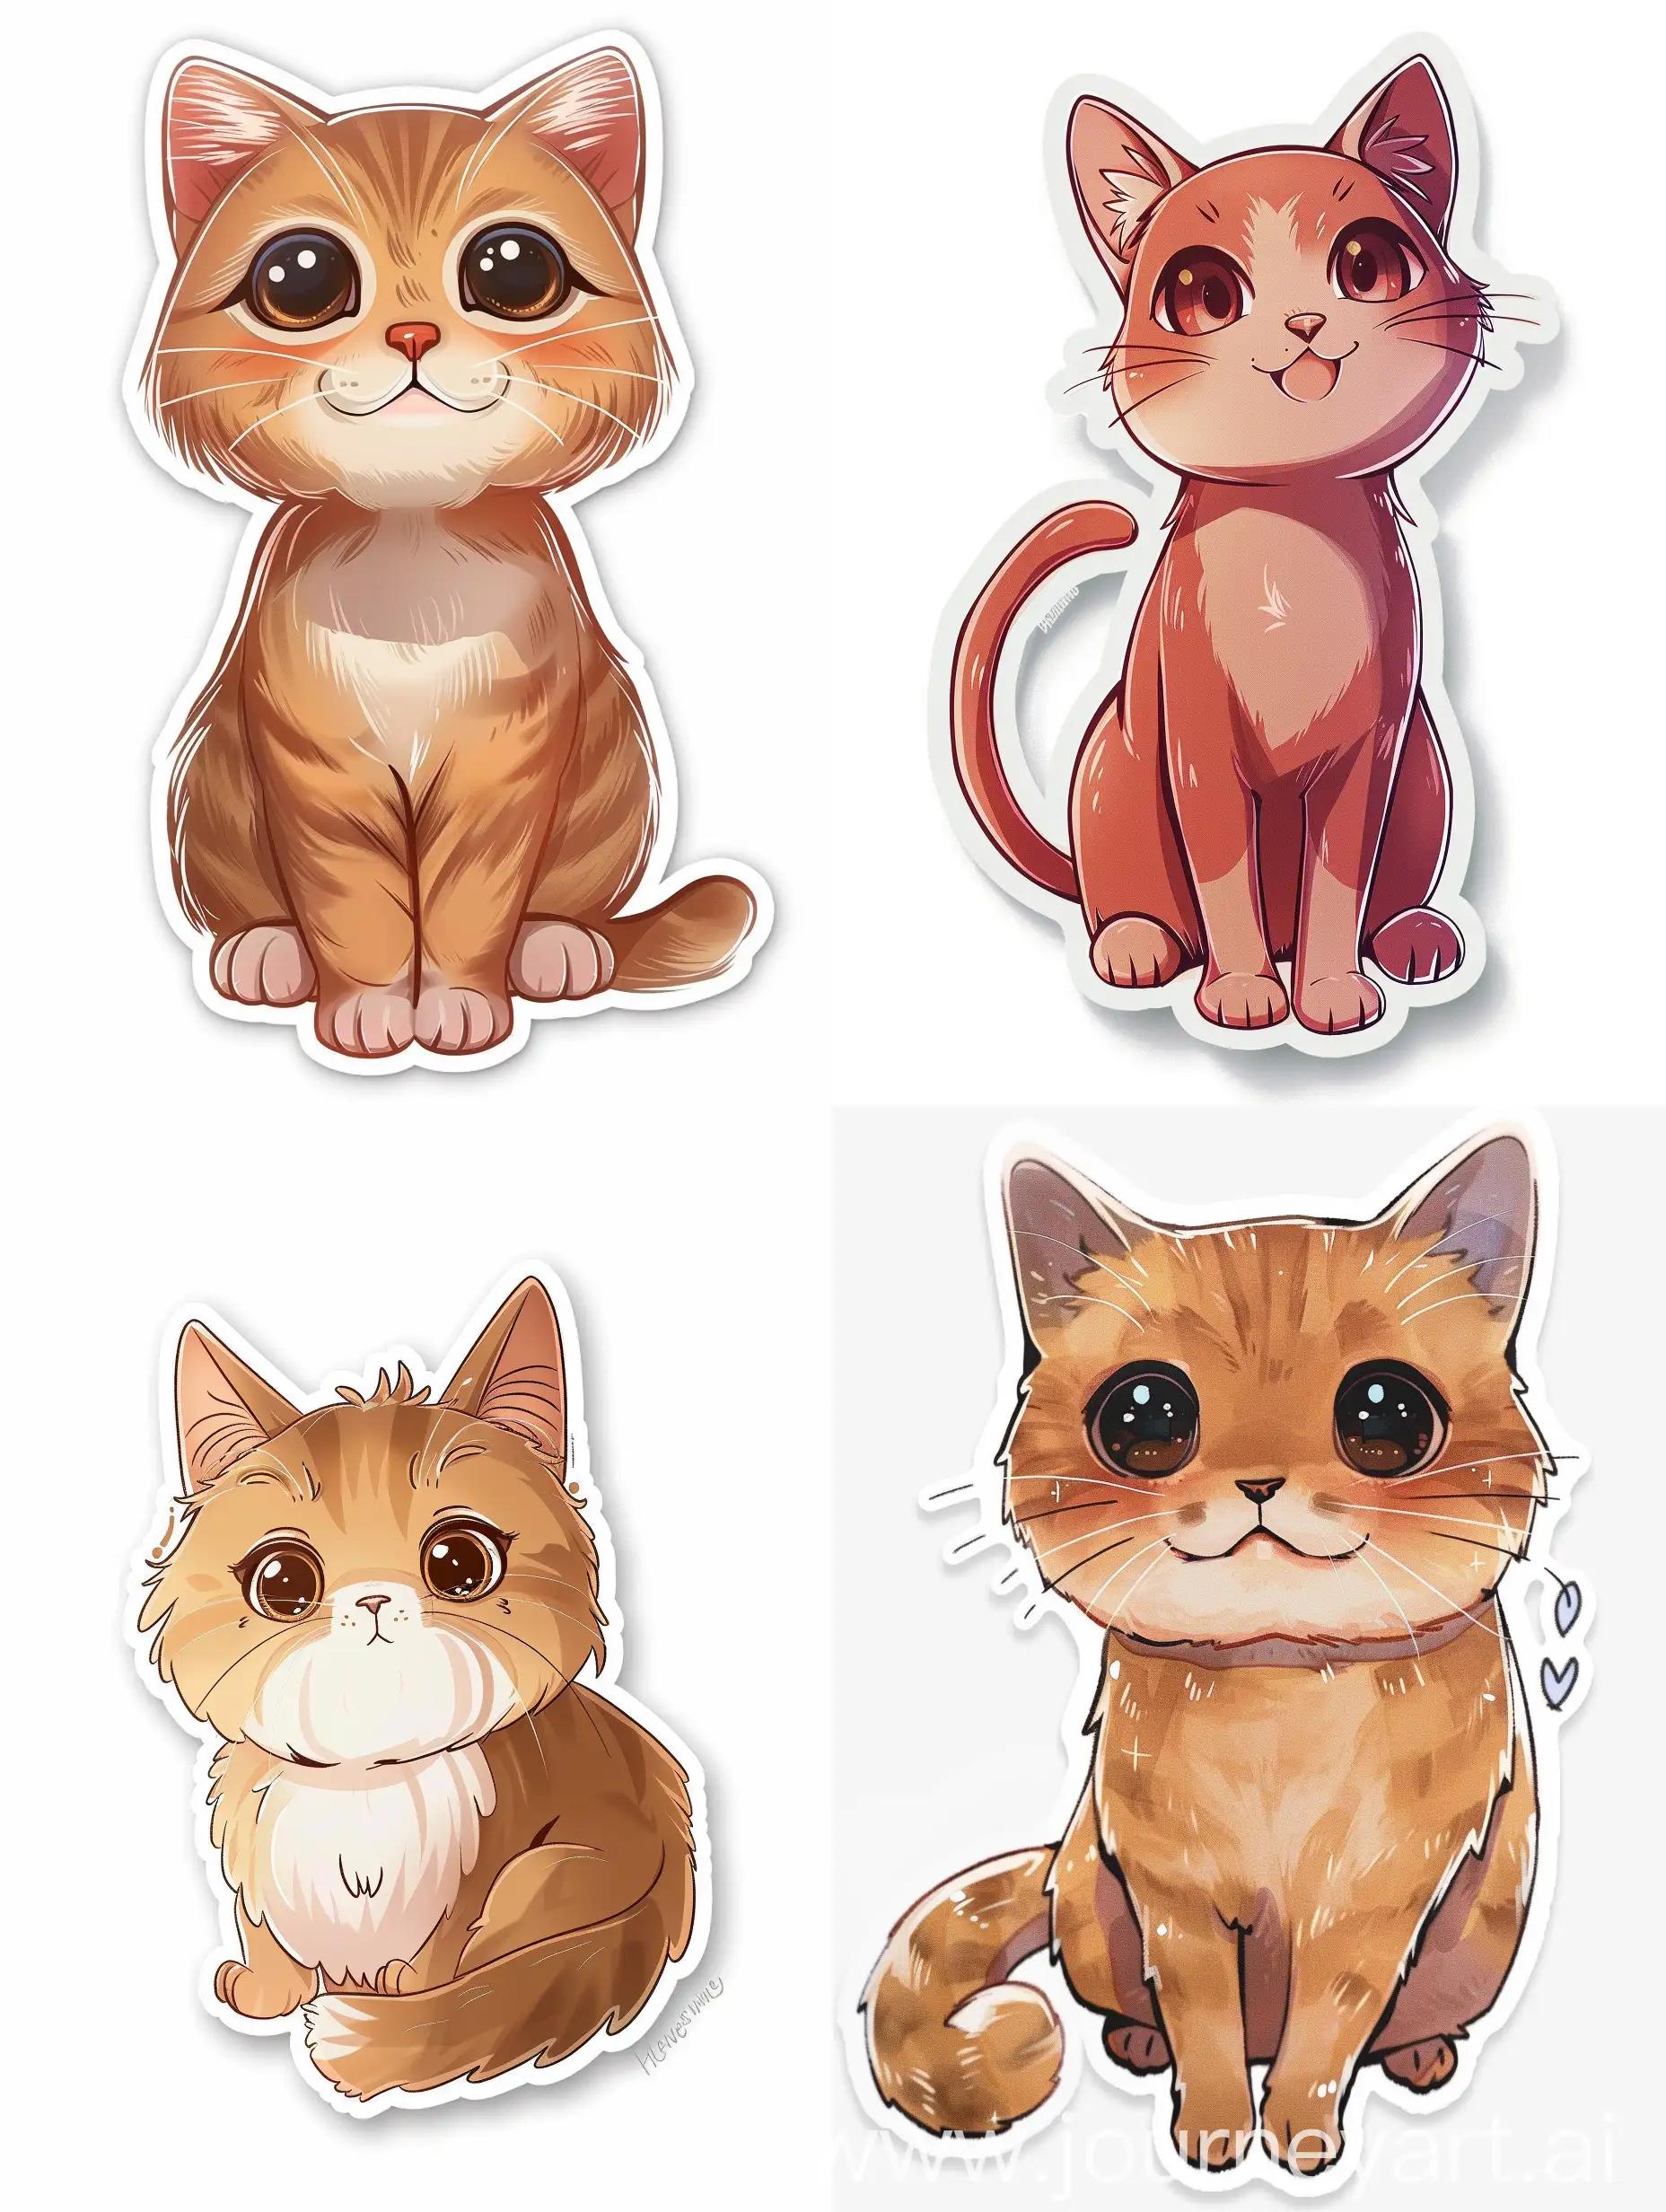 Adorable-AnimeStyle-Cat-Sticker-on-White-Background